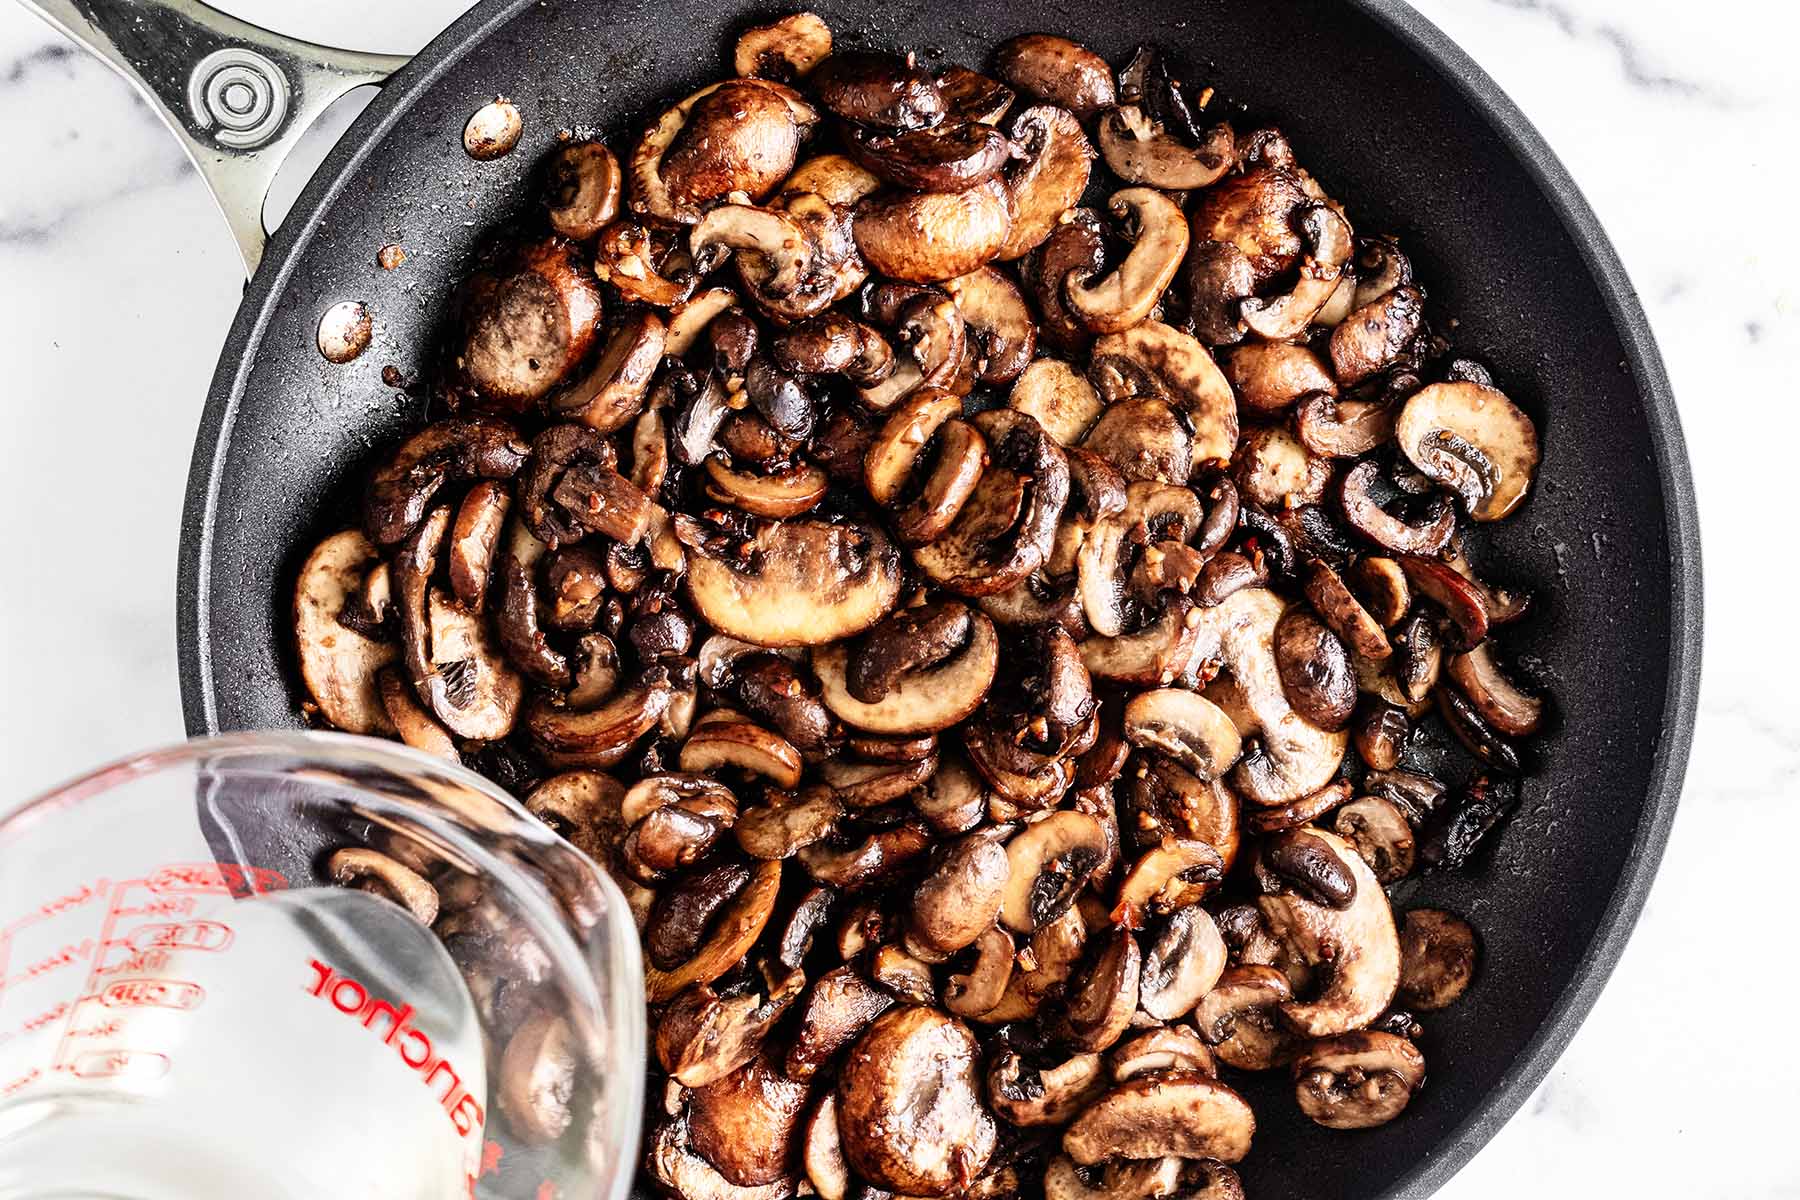 White wine being poured over sautéed sliced mushrooms in a skillet.